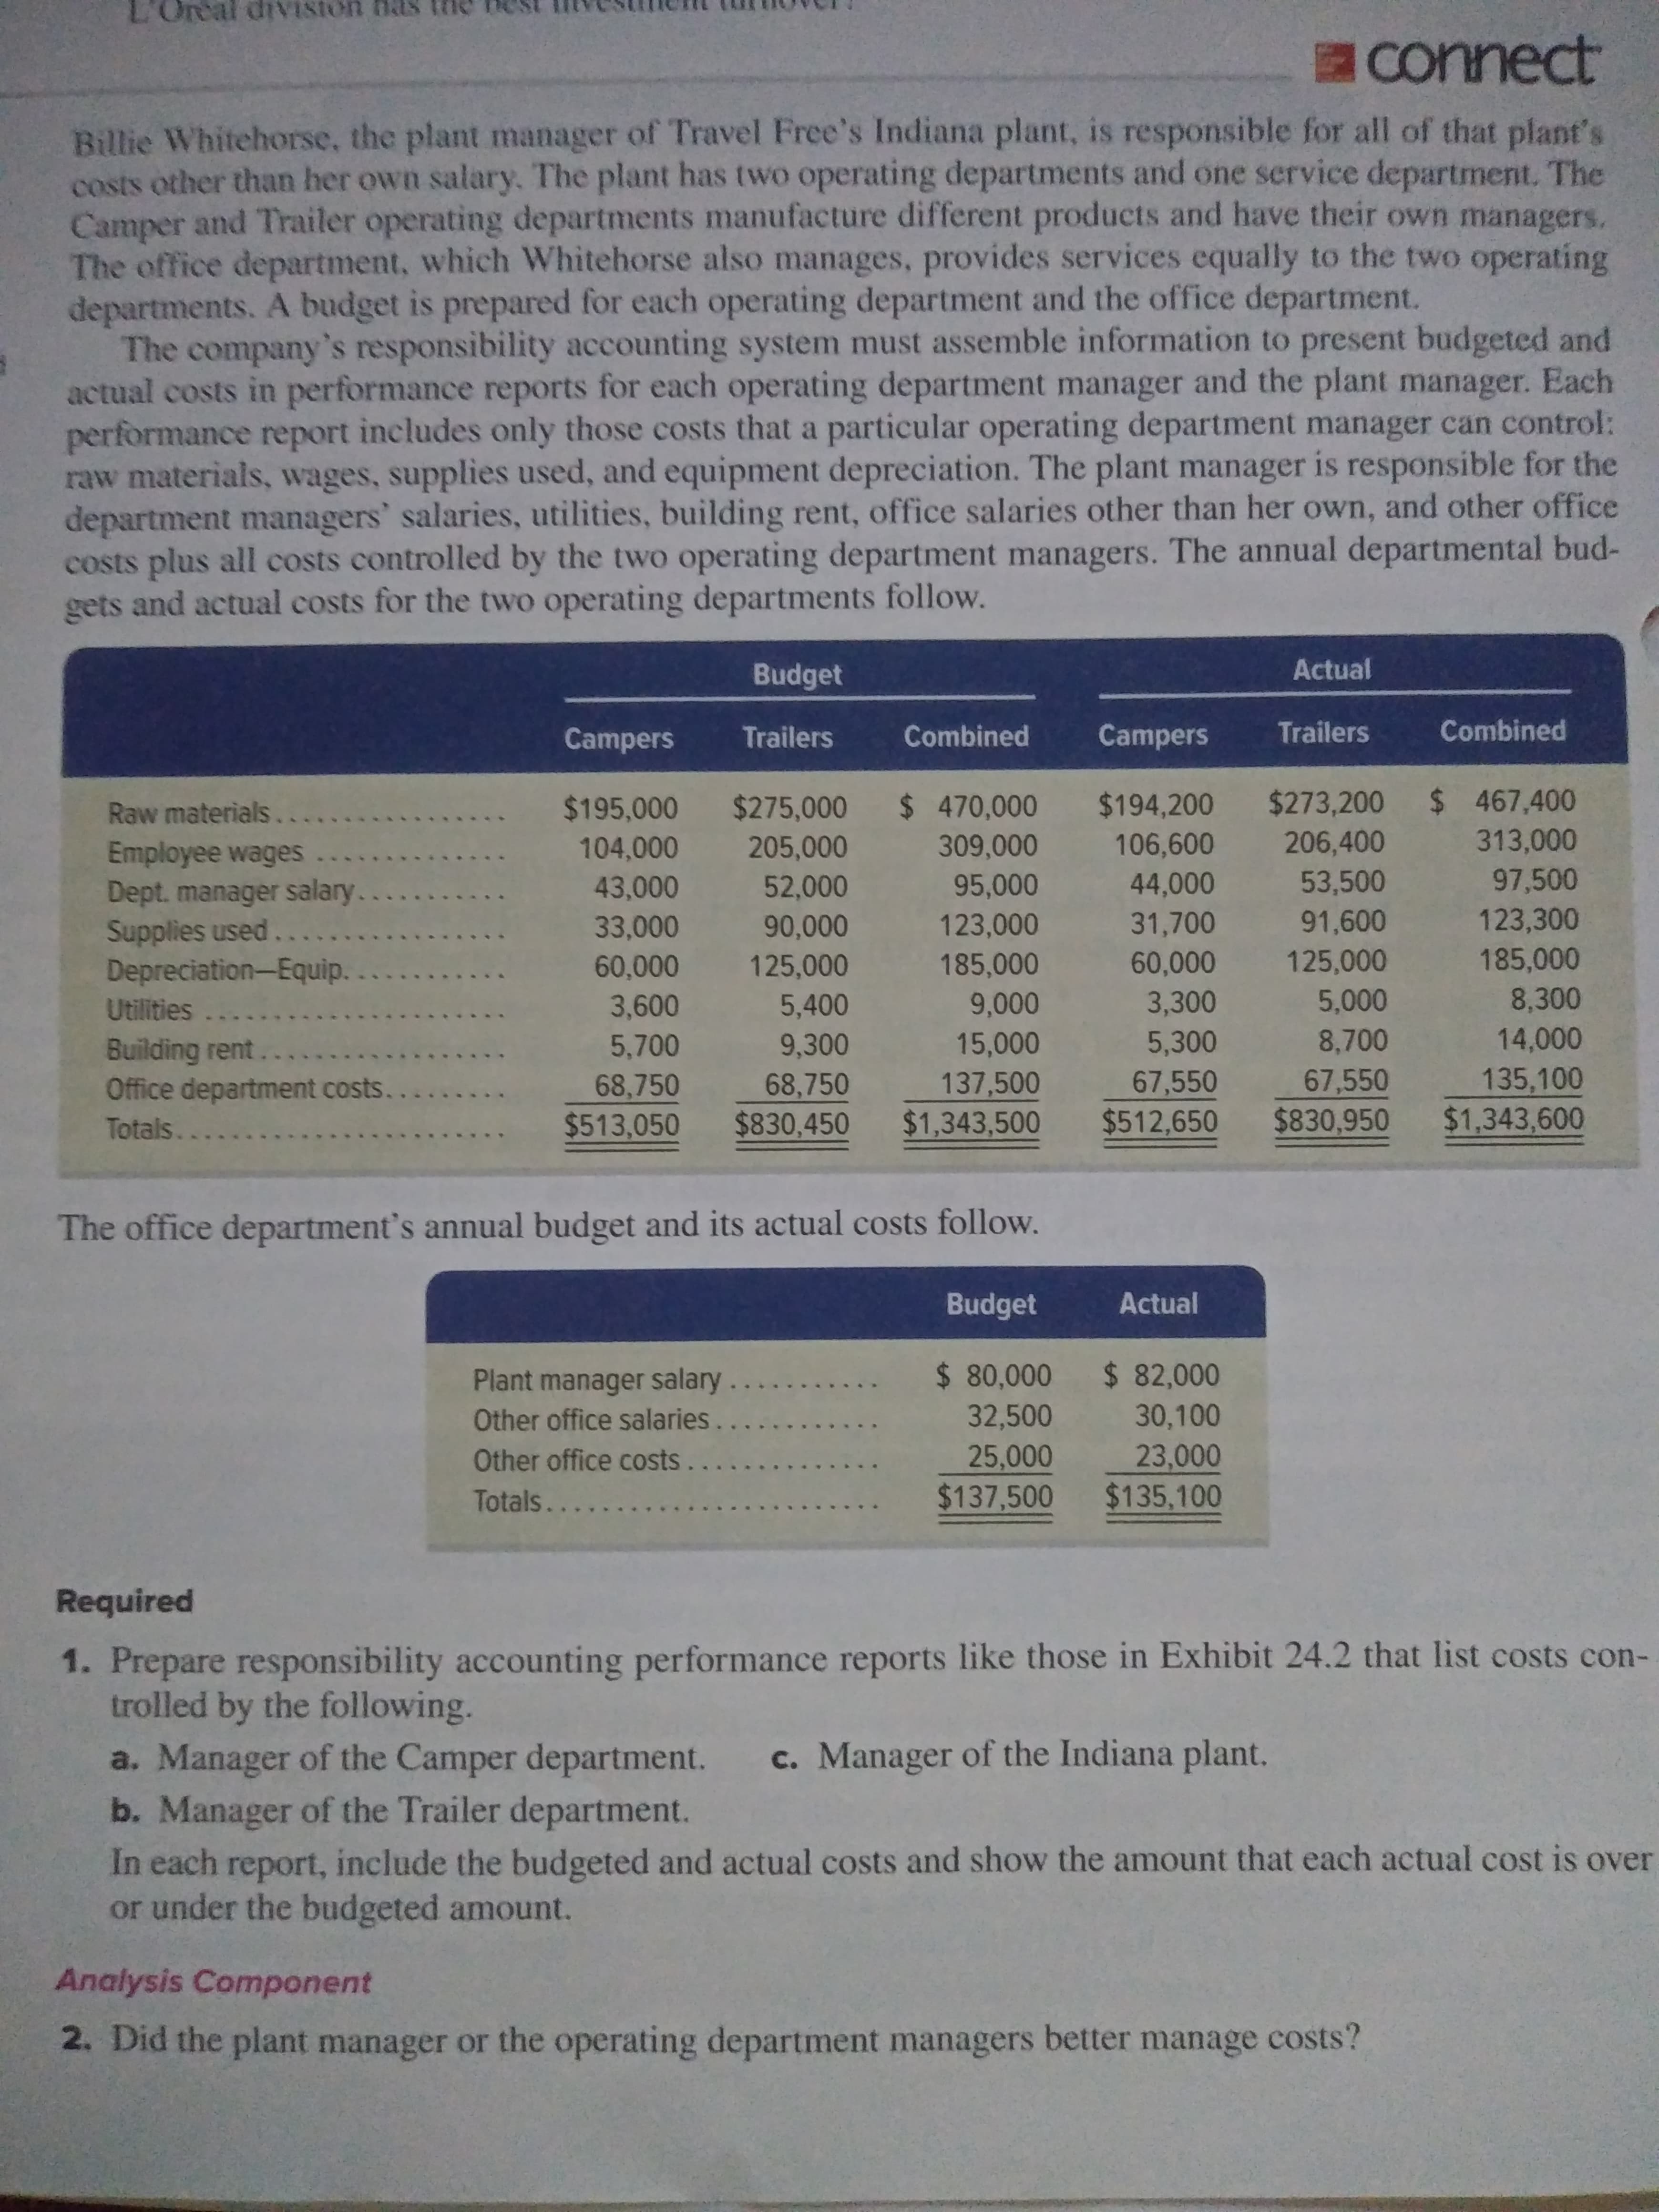 1. Prepare responsibility accounting performance reports like those in Exhibit 24.2 that list costs con-
trolled by the following.
a. Manager of the Camper department. c. Manager of the Indiana plant.
b. Manager of the Trailer department.
In each report, include the budgeted and actual costs and show the amount that each actual cost is over
or under the budgeted amount.
Analysis Component
2. Did the plant manager or the operating department managers better manage costs?
